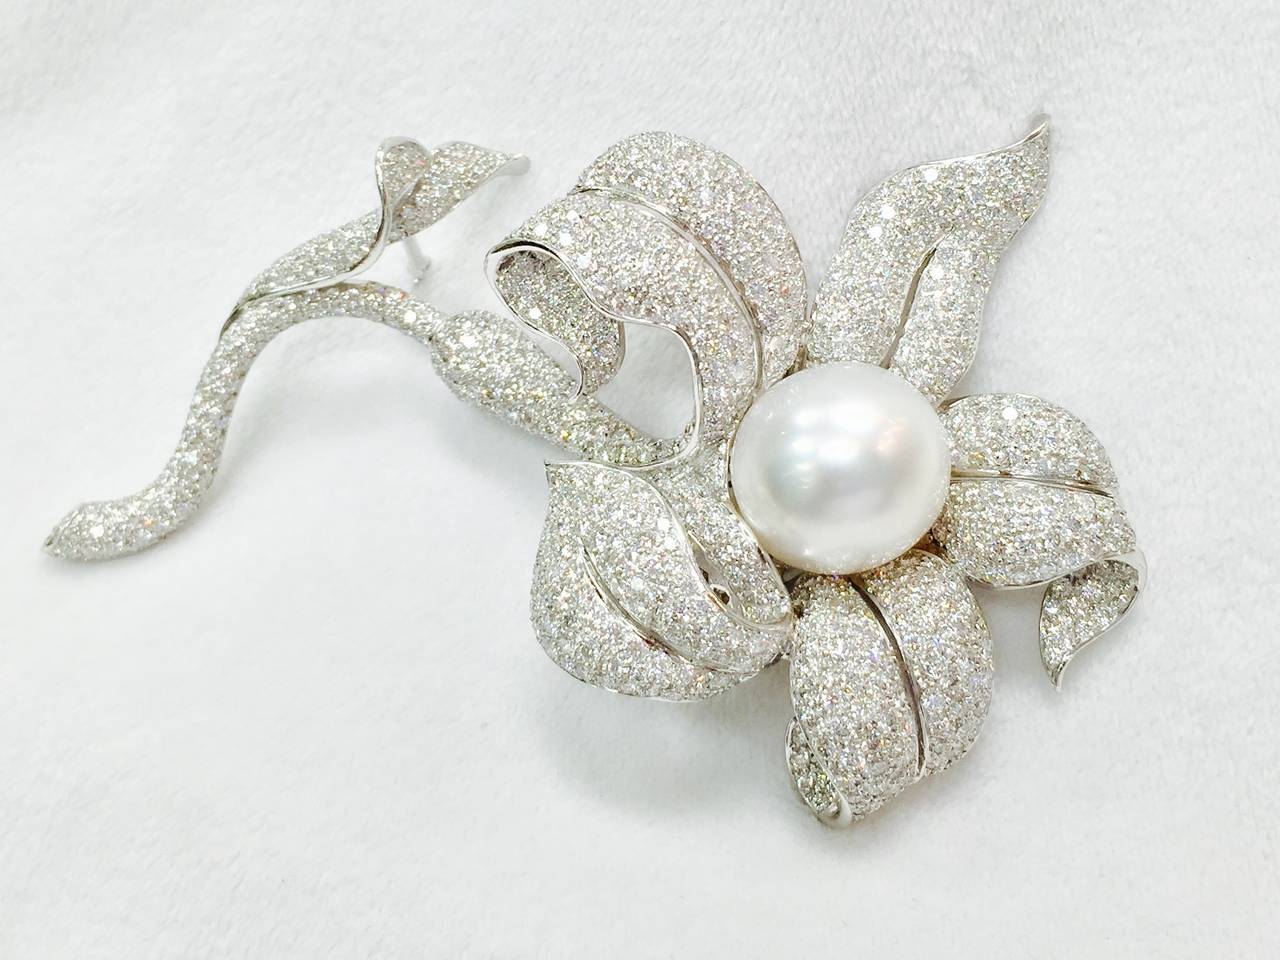 New White Diamond and Pearl Brooch artfully crafted in 18K White Gold.  The flower has incredible dimensional twists and curves.  Heavily encrusted with brilliant cut diamonds F/G color, VS1 clarity and 13.5 carats total weight.  A lustrous center